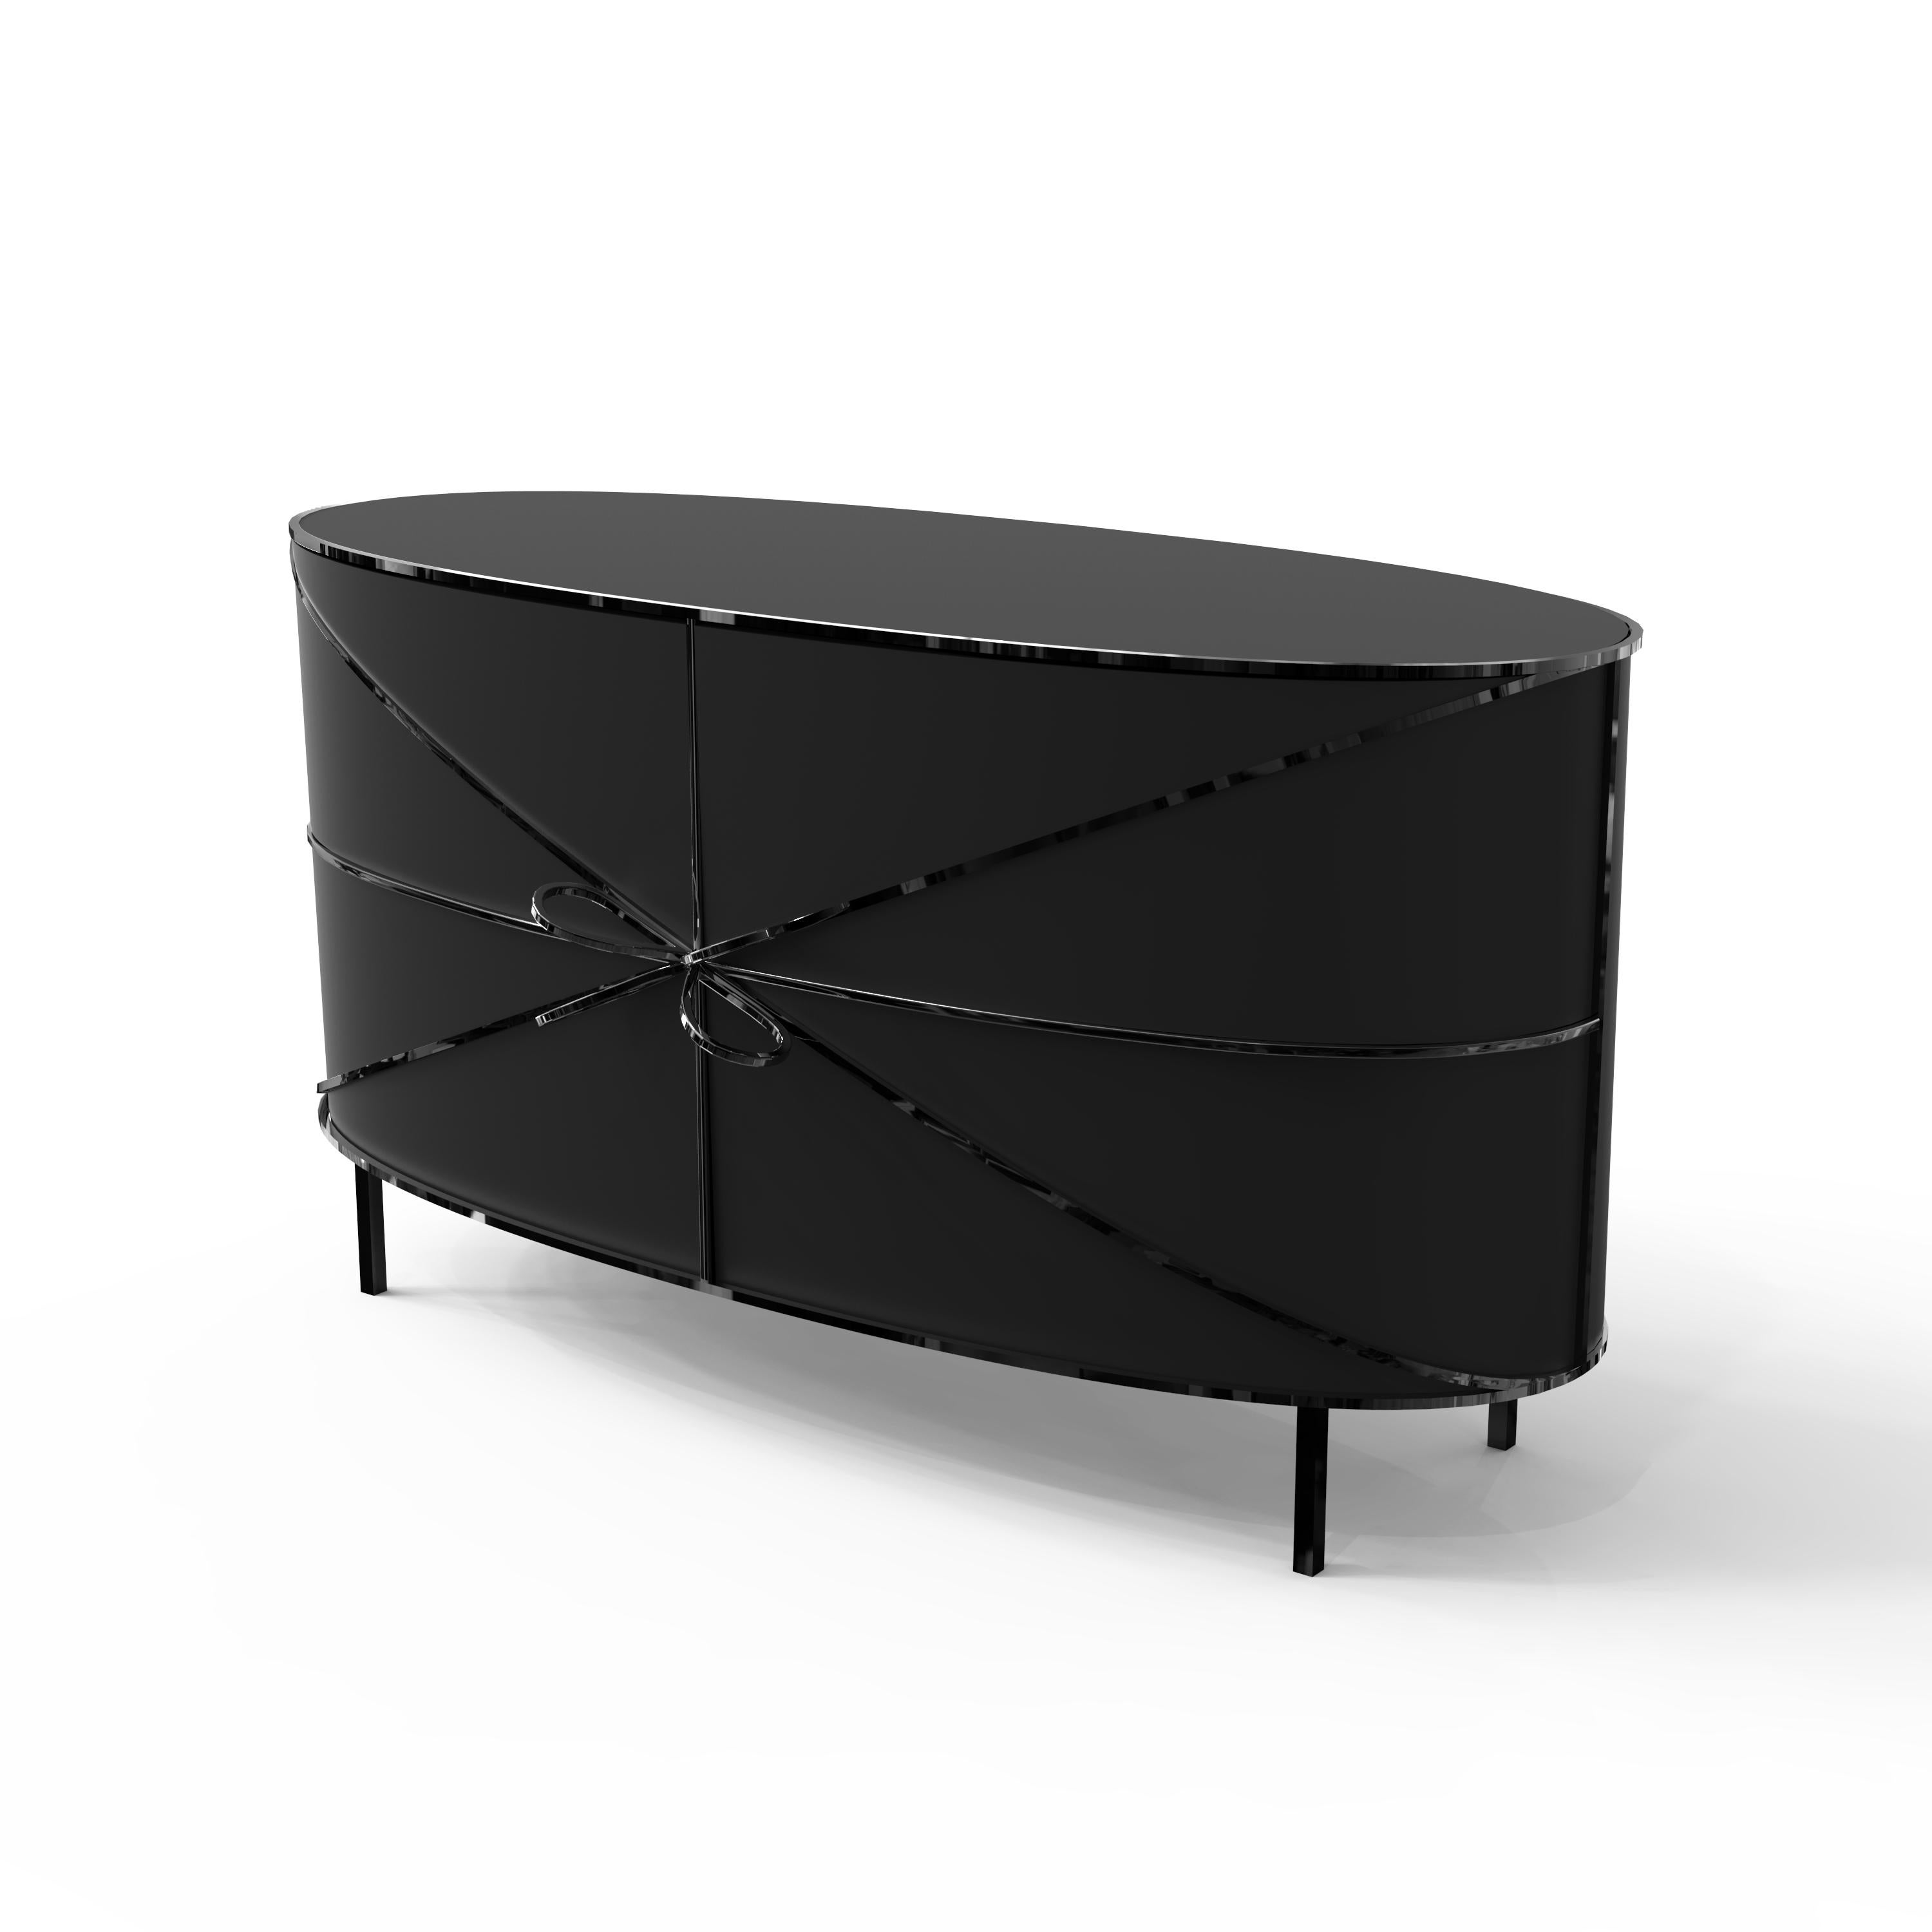 88 Secrets Black Sideboard by Nika Zupanc is an elegant cabinet in sensuous, feminine lines with luxurious black metal trims. A statement piece in any interior space!

Nika Zupanc, a strikingly renowned Slovenian designer, never shies away from